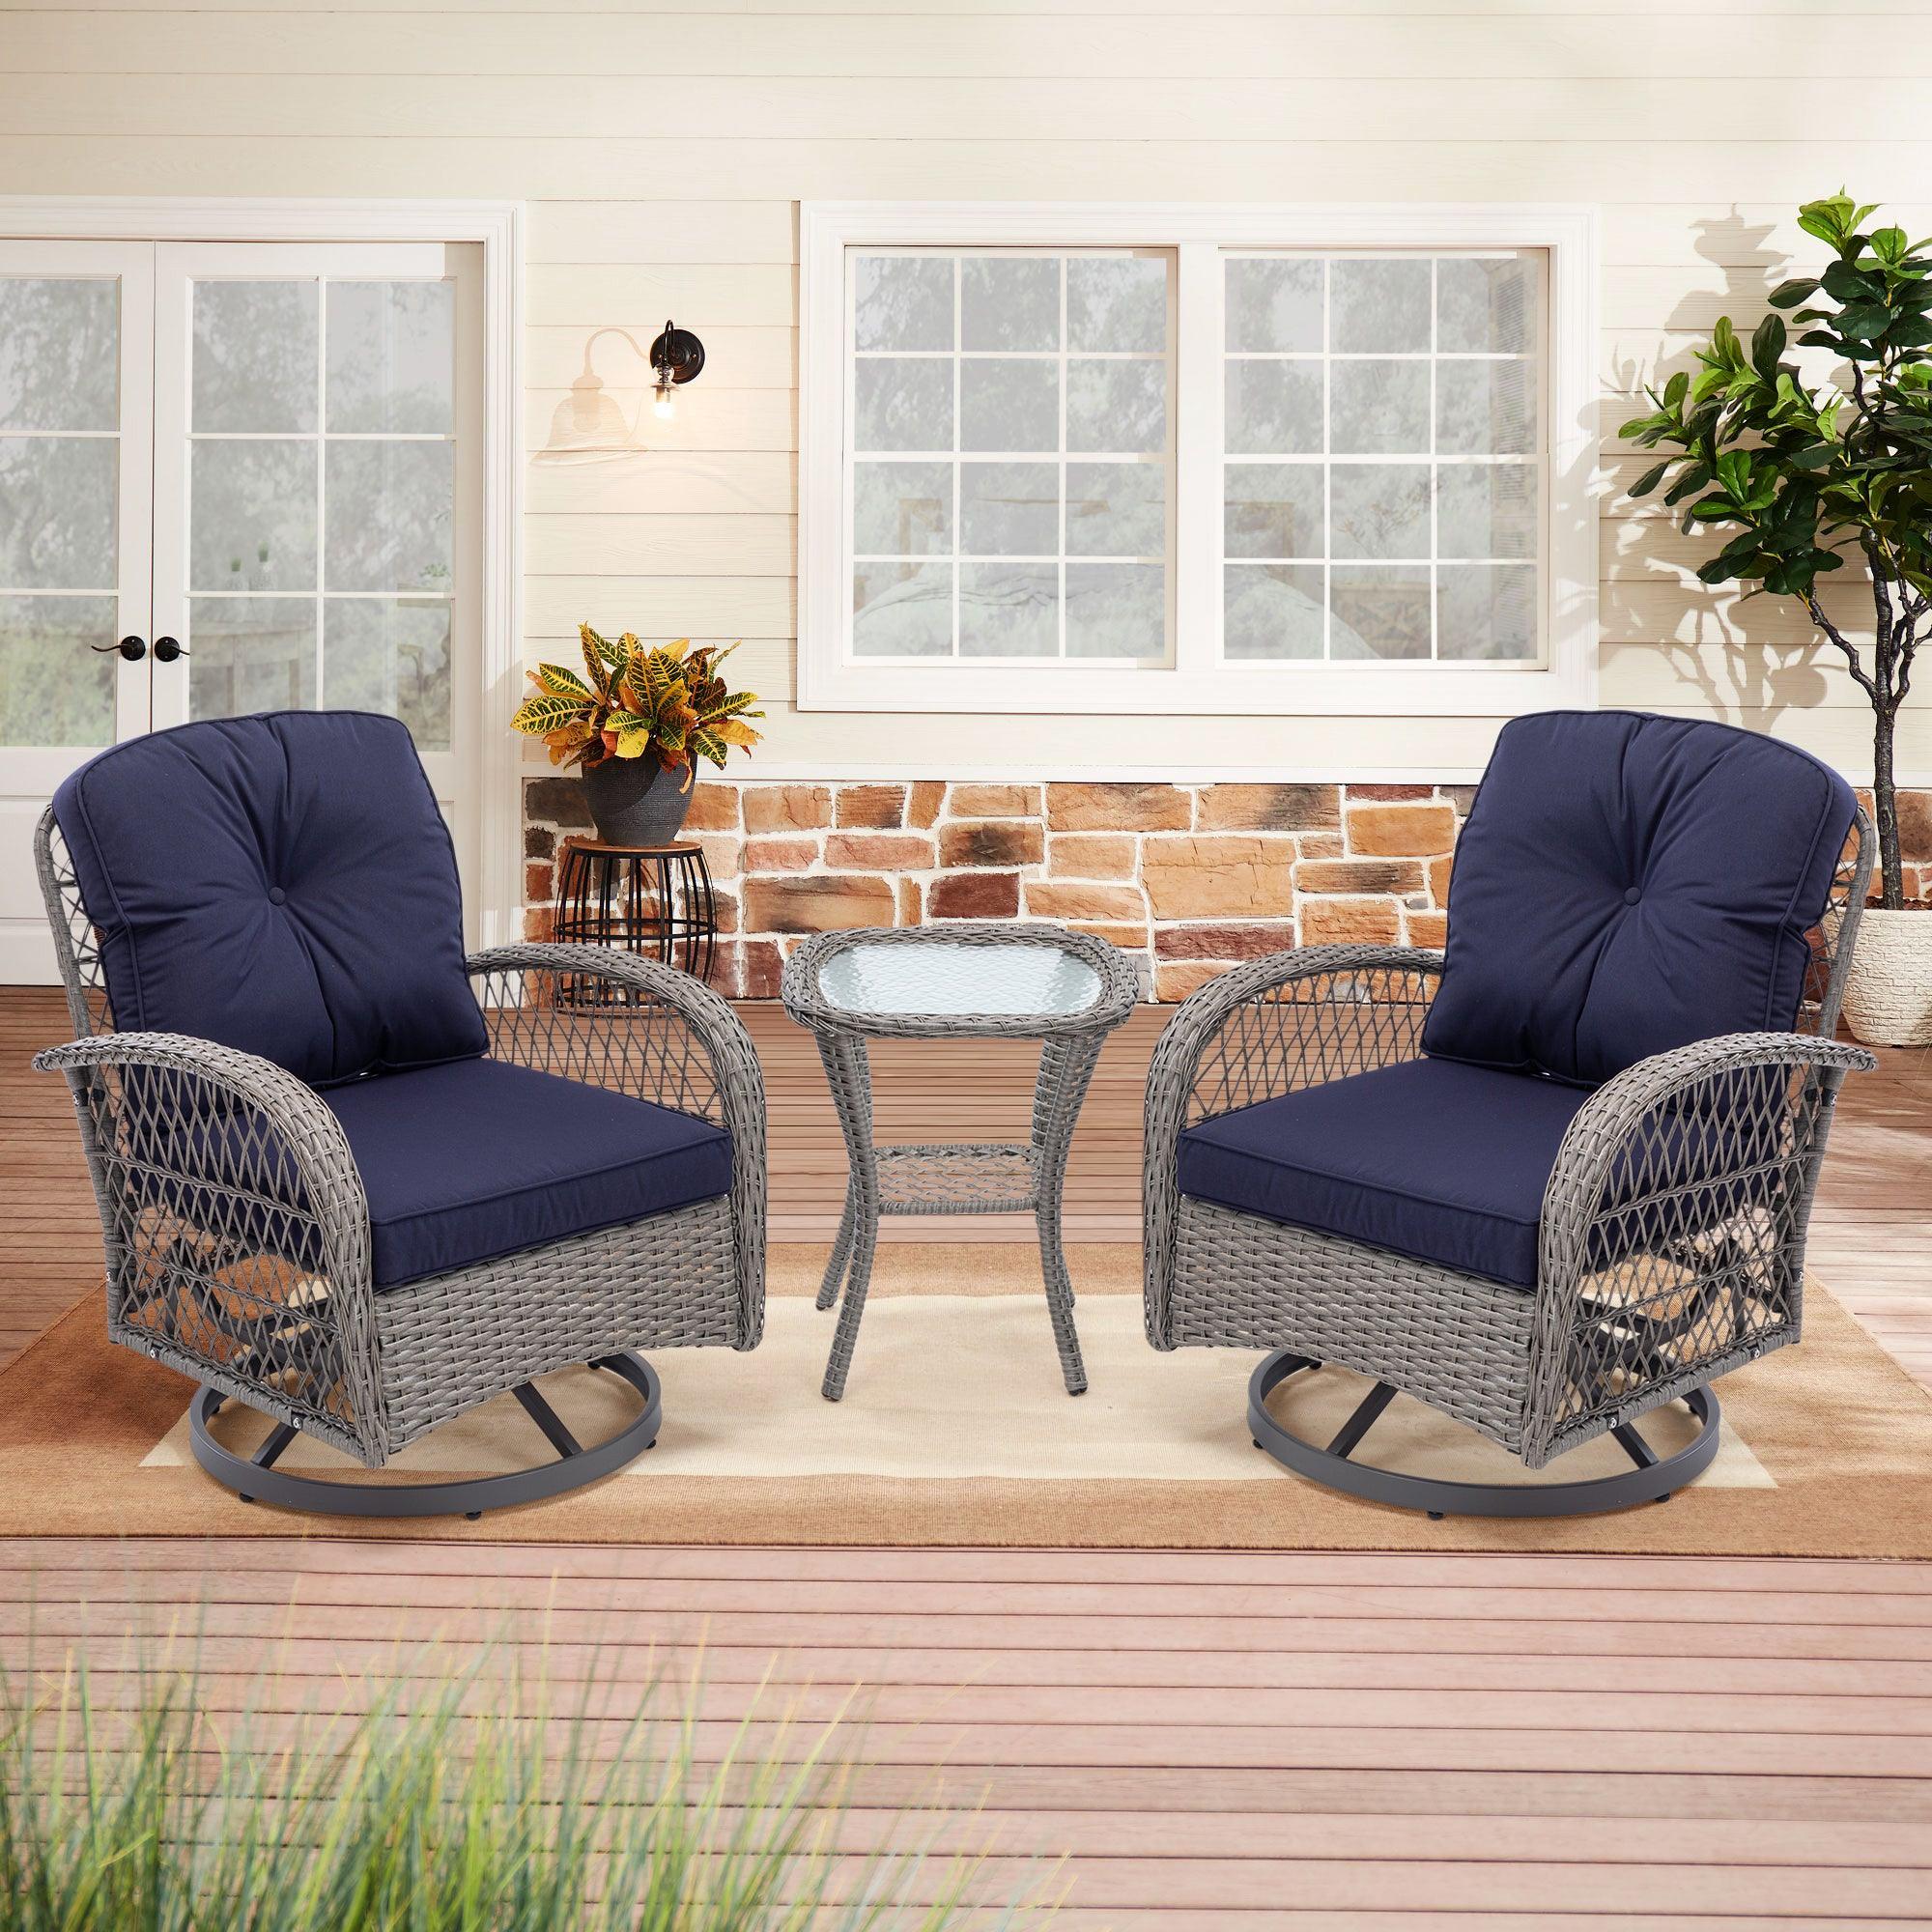 🆓🚛 3 Pieces Outdoor Swivel Rocker Patio Chairs, 360 Degree Rocking Patio Conversation Set with Thickened Cushions & Glass Coffee Table, Navy blue